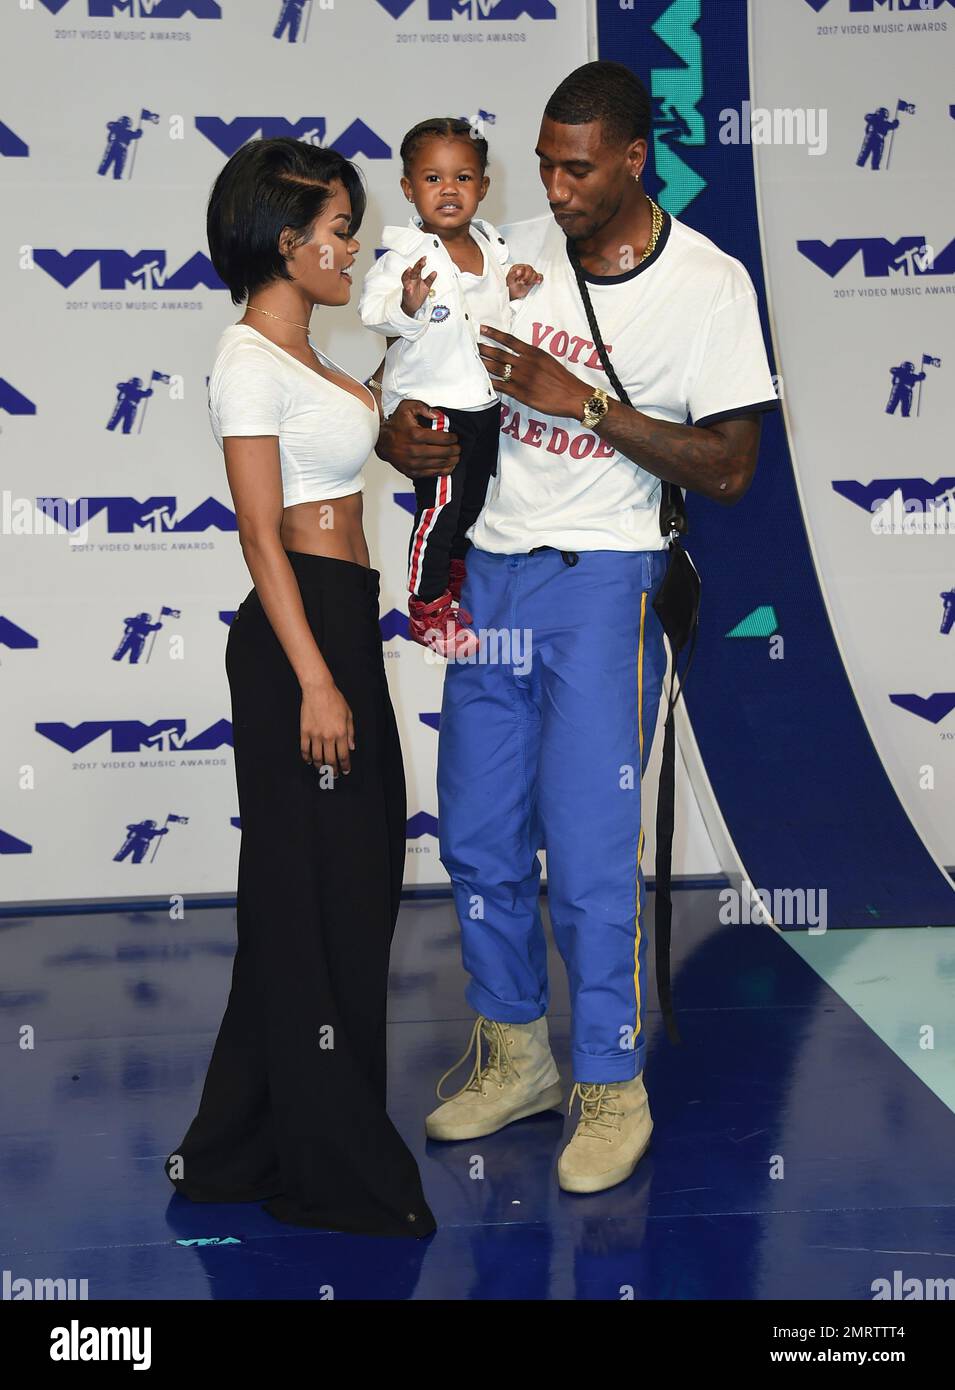 Teyana Taylor, left, Iman Shumpert, right, and their daughter Iman arrive  at the MTV Video Music Awards at The Forum on Sunday, Aug. 27, 2017, in  Inglewood, Calif. (Photo by Jordan Strauss/Invision/AP